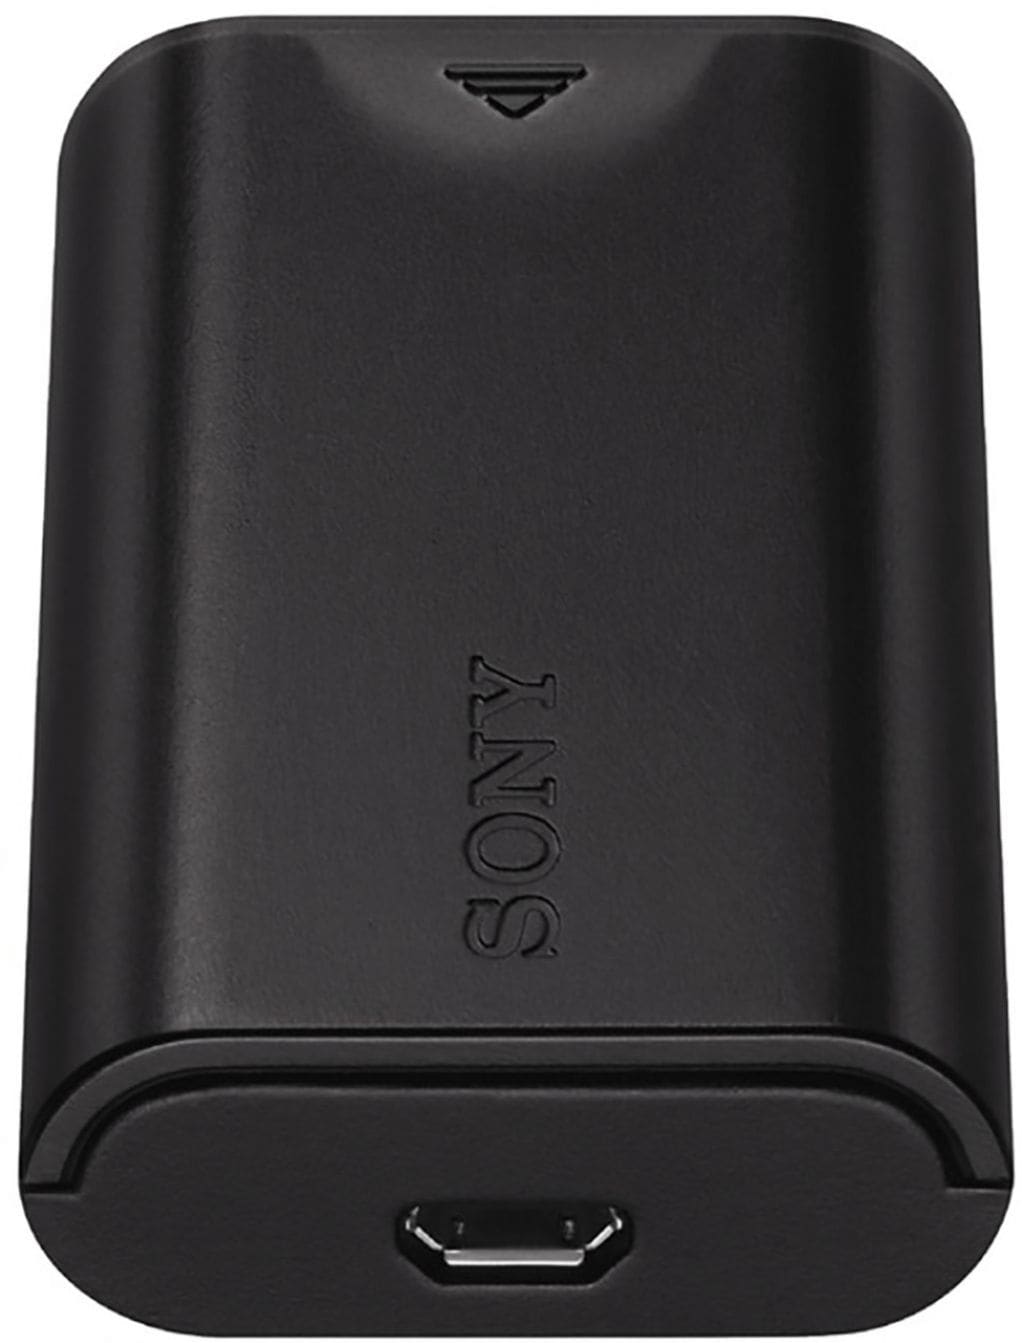 Sony - Cyber-shot ACCTRDCX Travel DC Charger Kit - Black_2